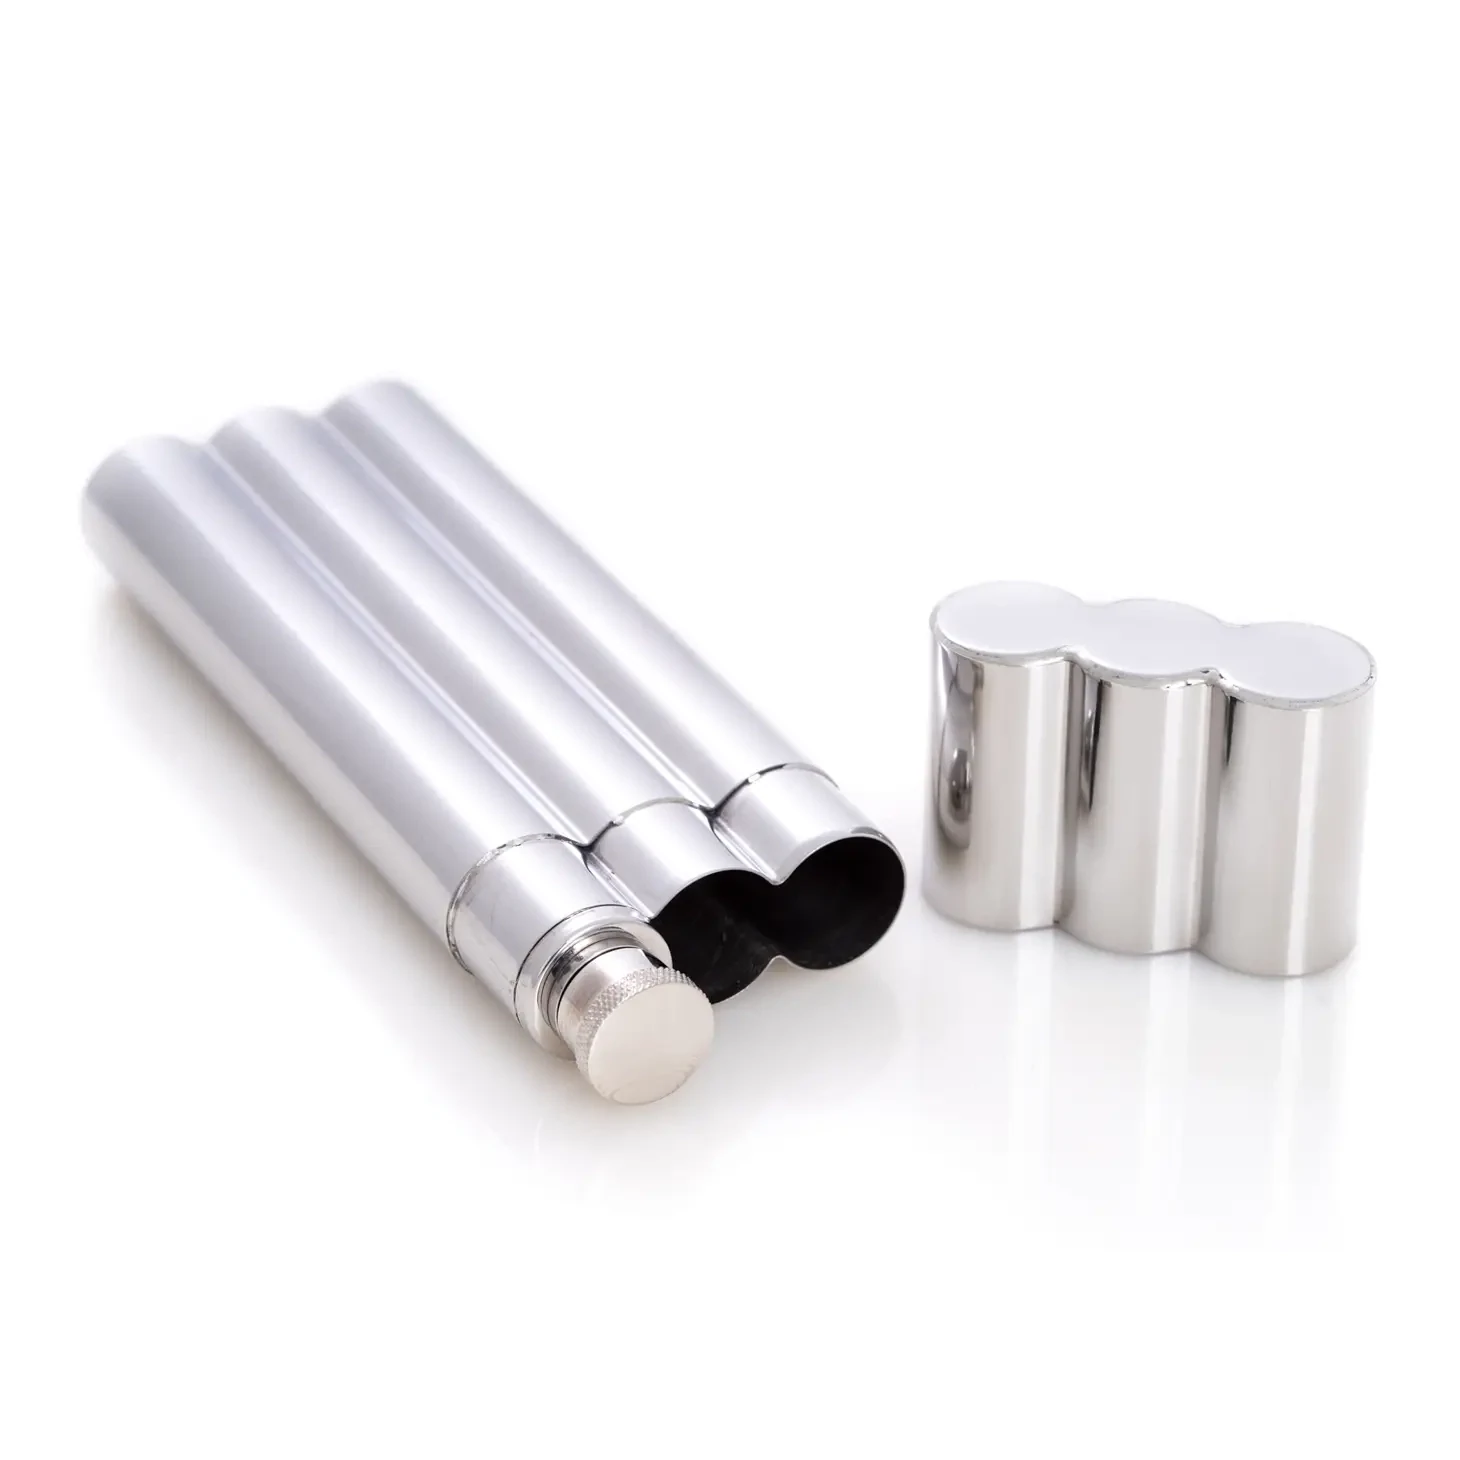 2oz Flask With Stainless Steel Double Cigar Tube